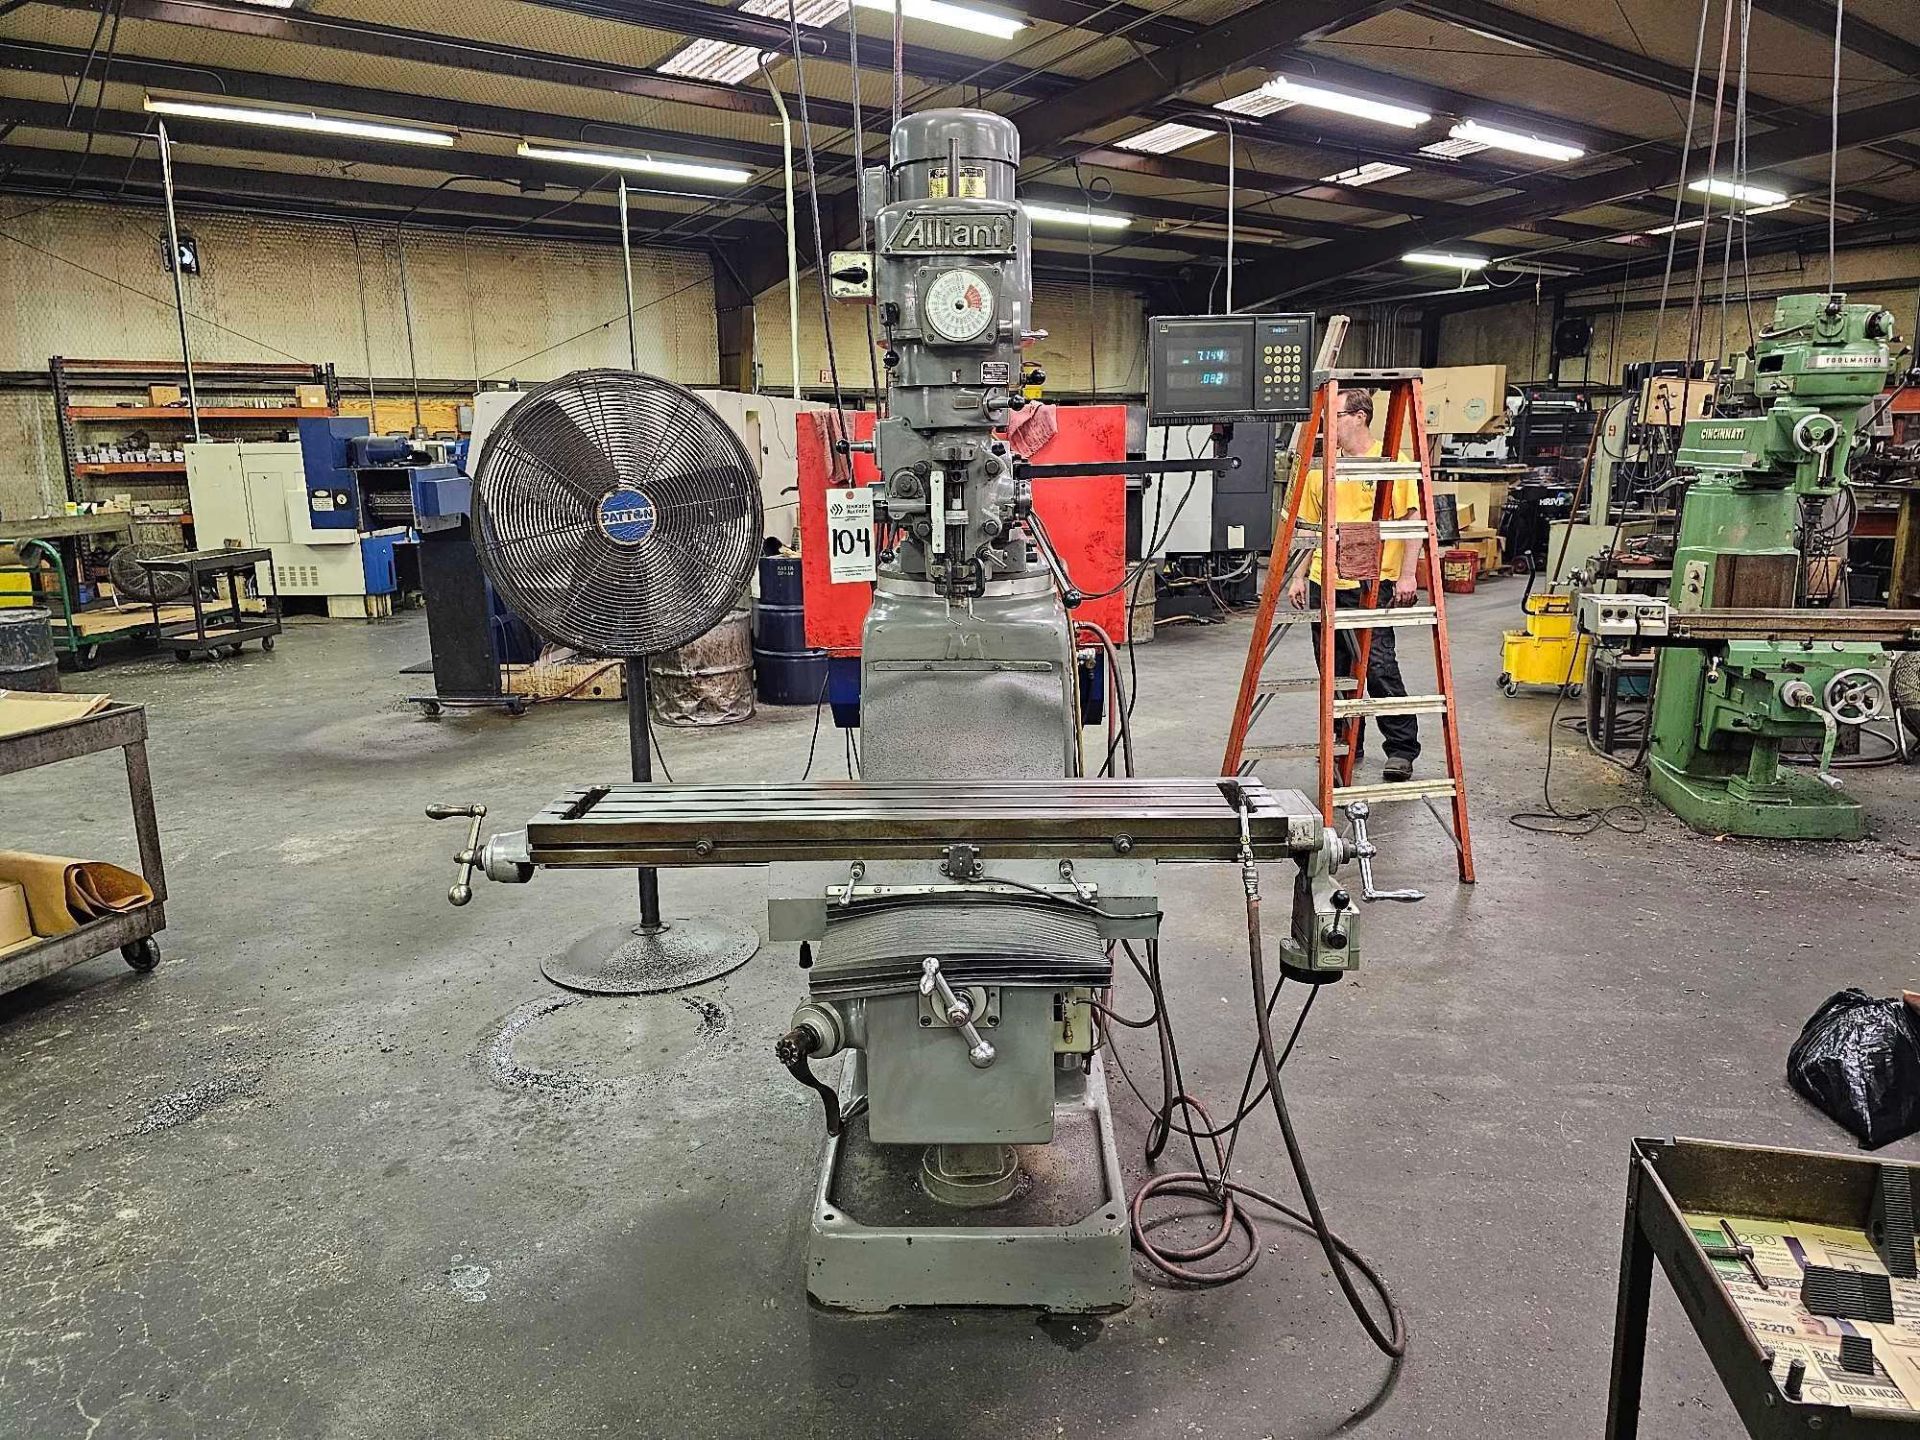 ALLIANT 10"X 50" KNEE MILL WITH DRO